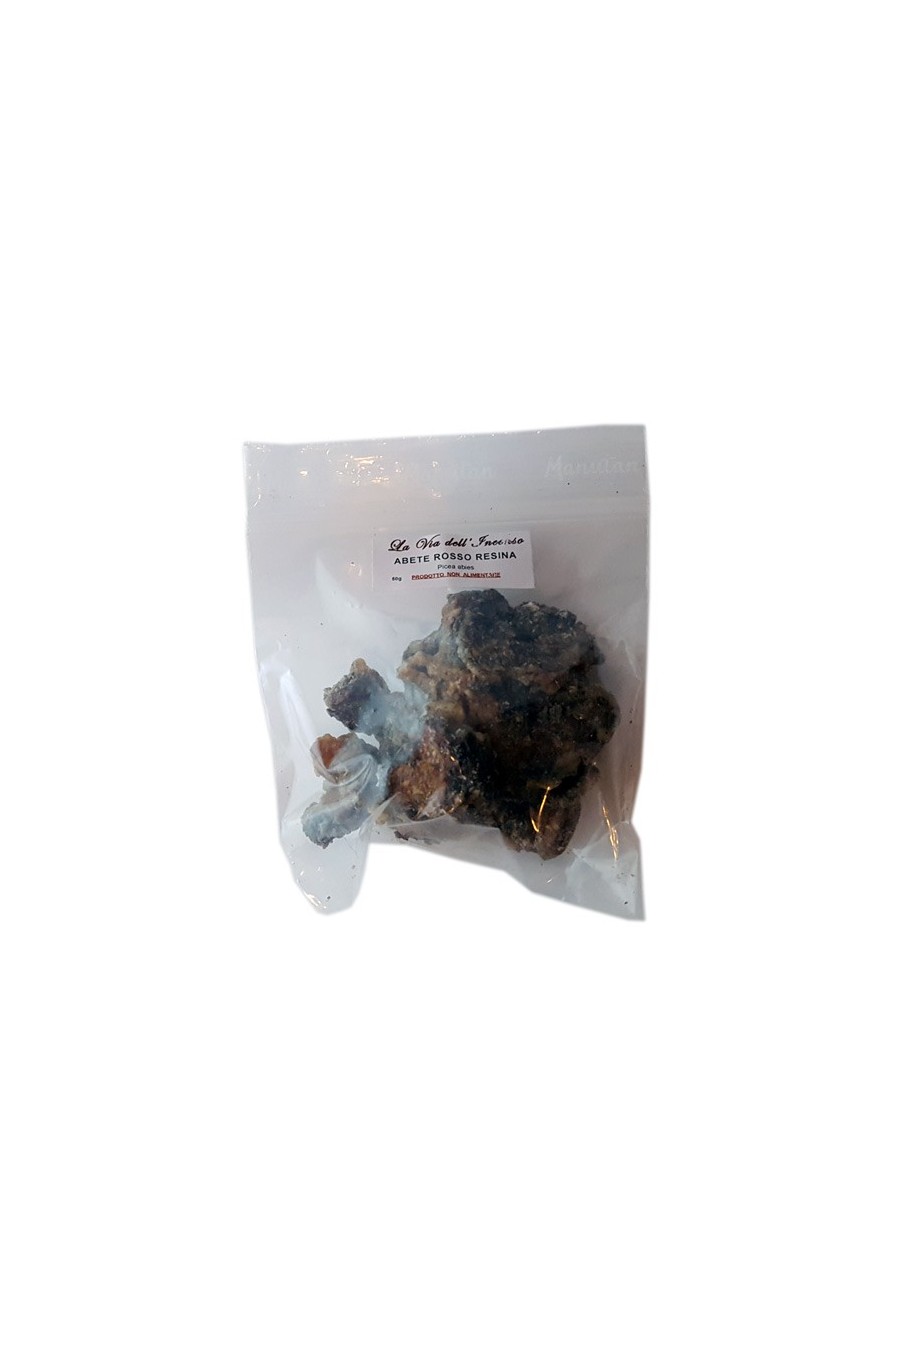 Norway Spruce Resin Raw (Picea abies)